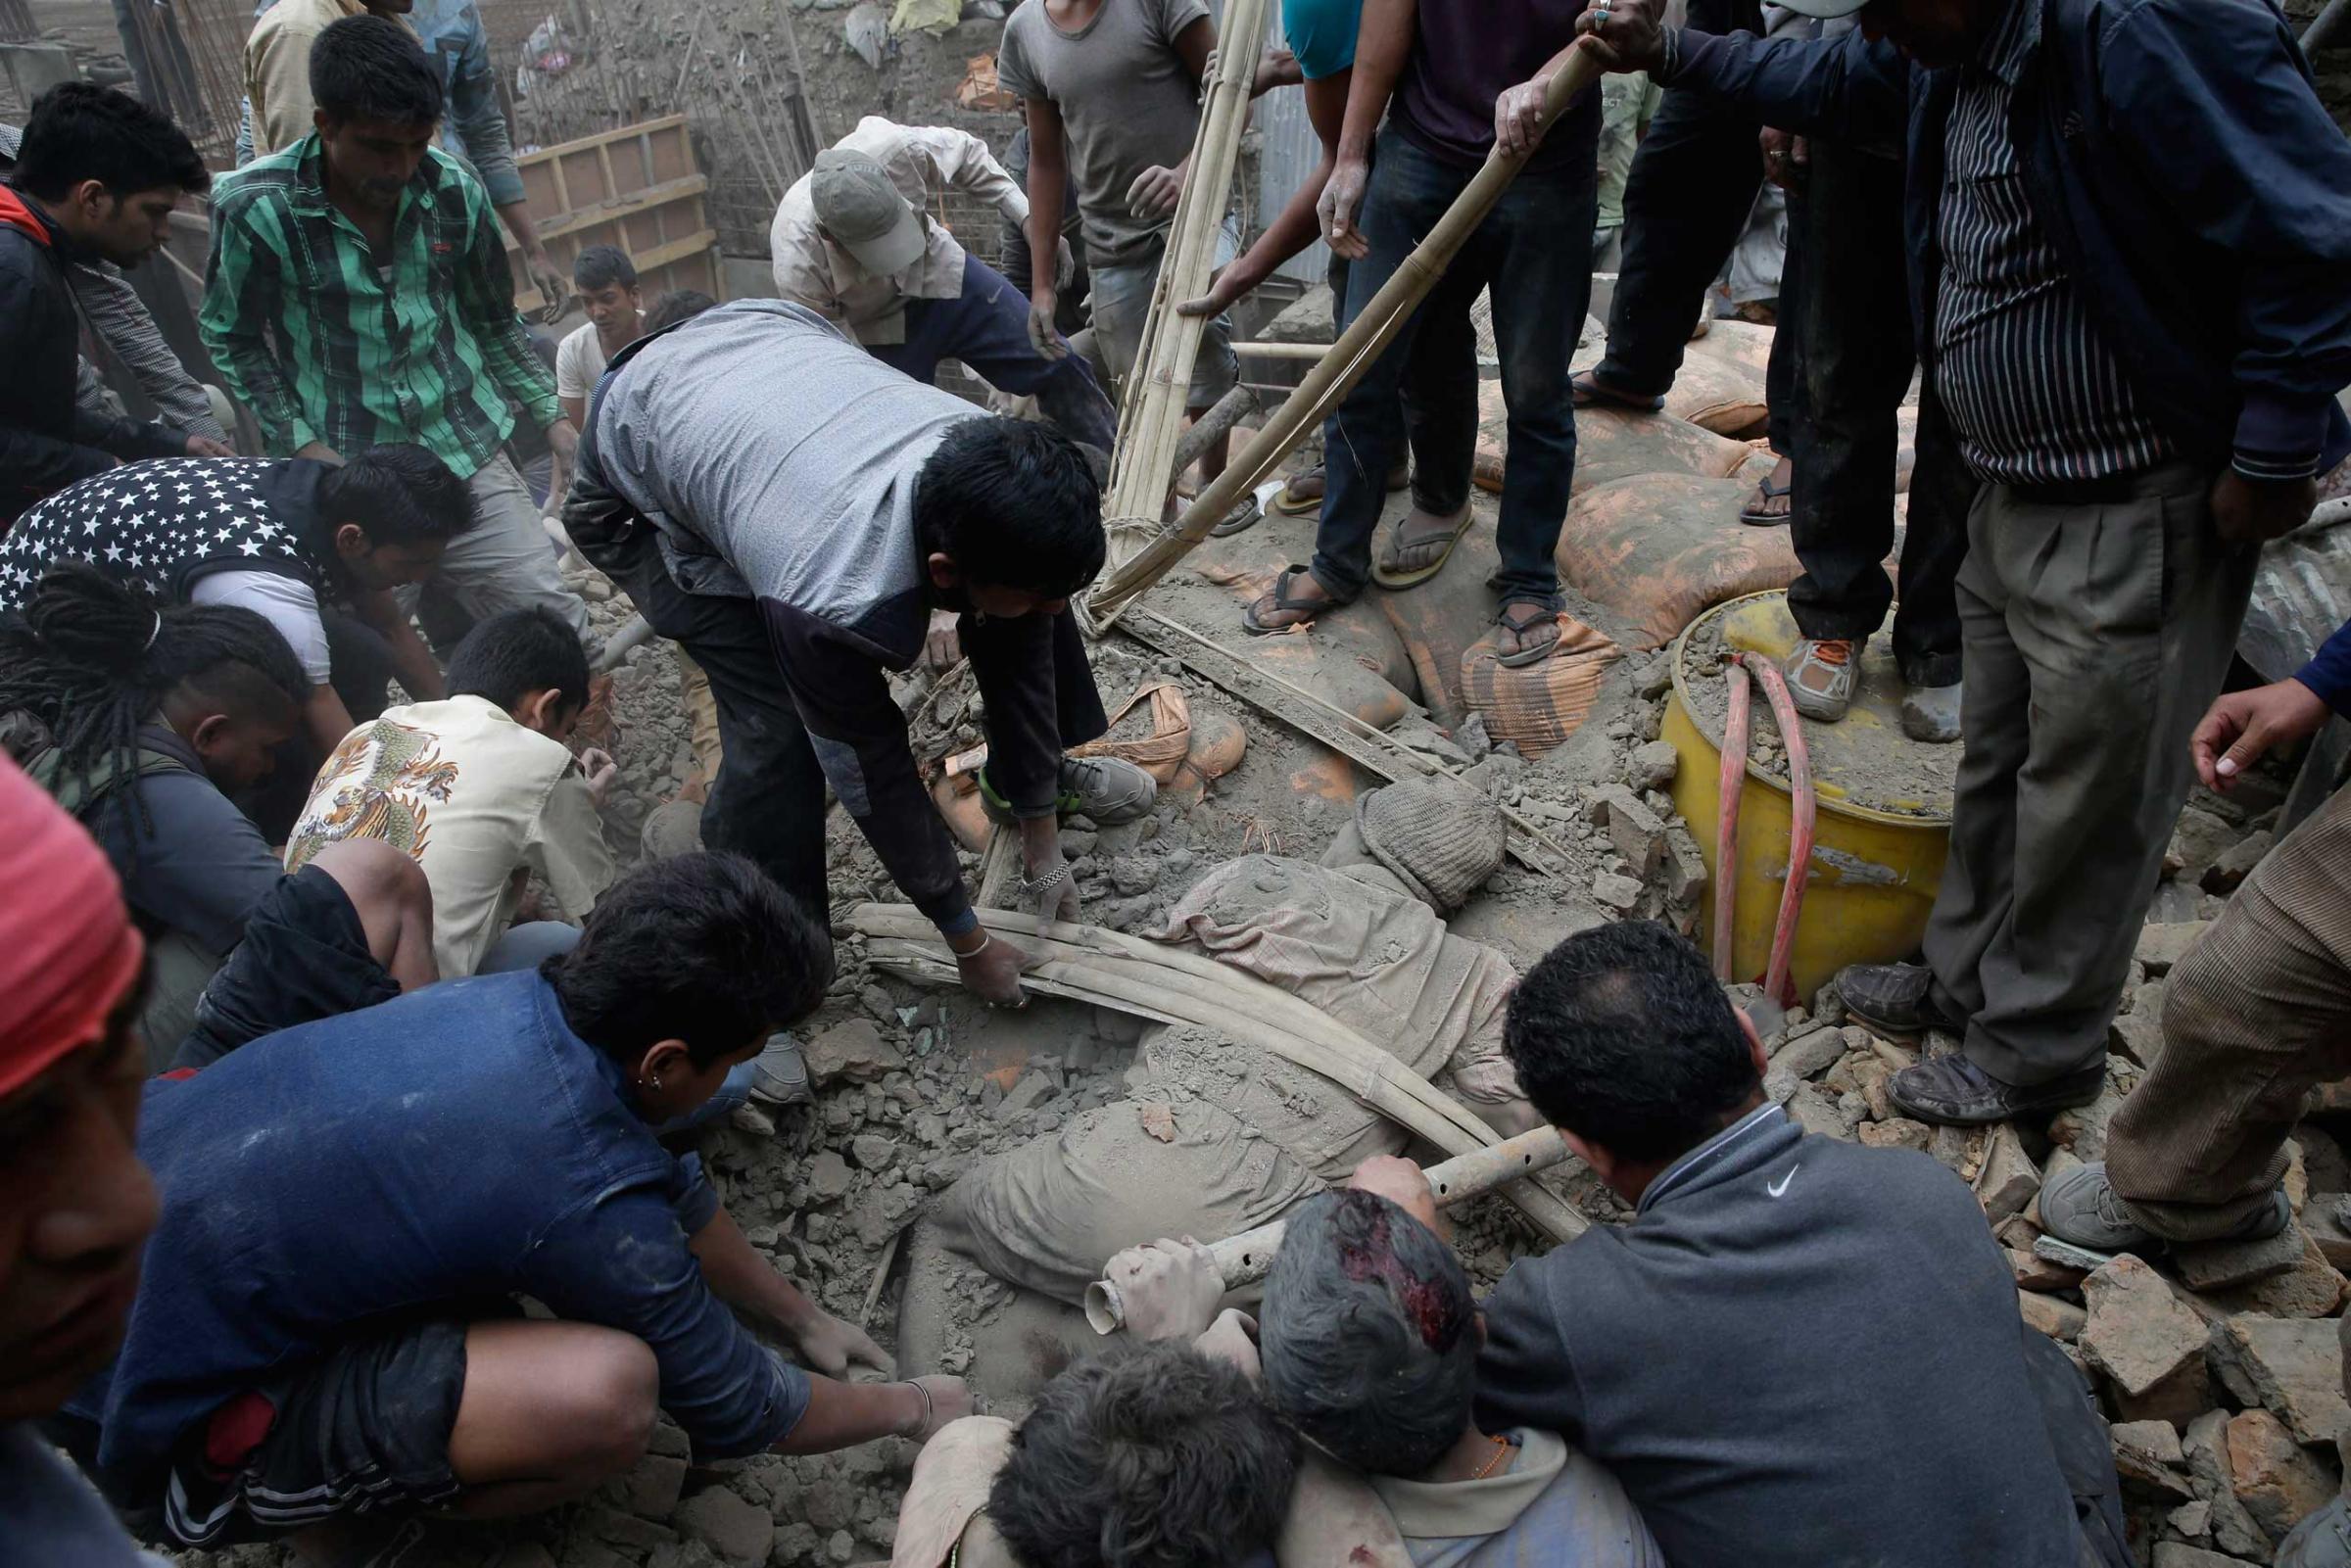 People try to free a man from the rubble of a destroyed building after an earthquake in Kathmandu, Nepal on April 25, 2015.